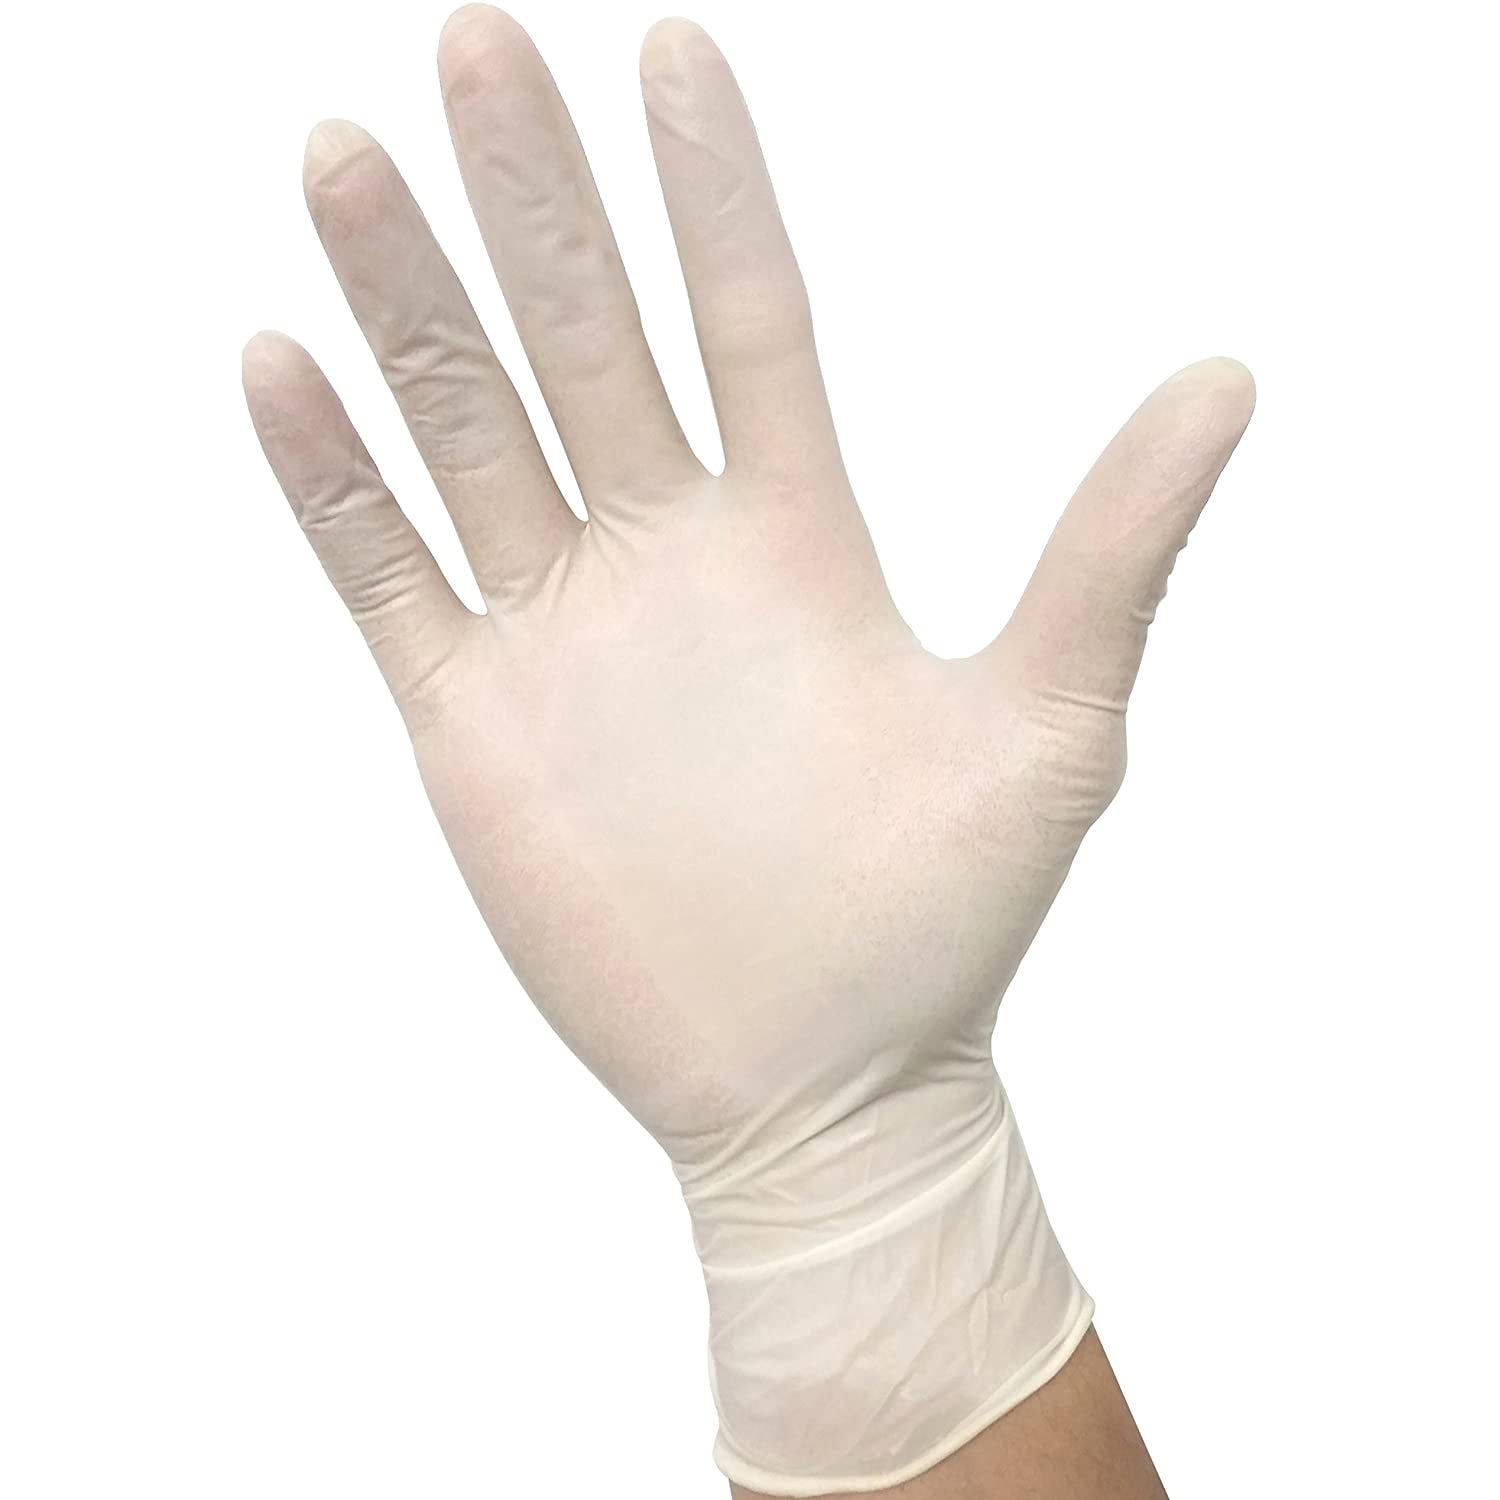 Premier Latex Sterile Powder Free Gloves | Small | Pack of 50 pairs (7)